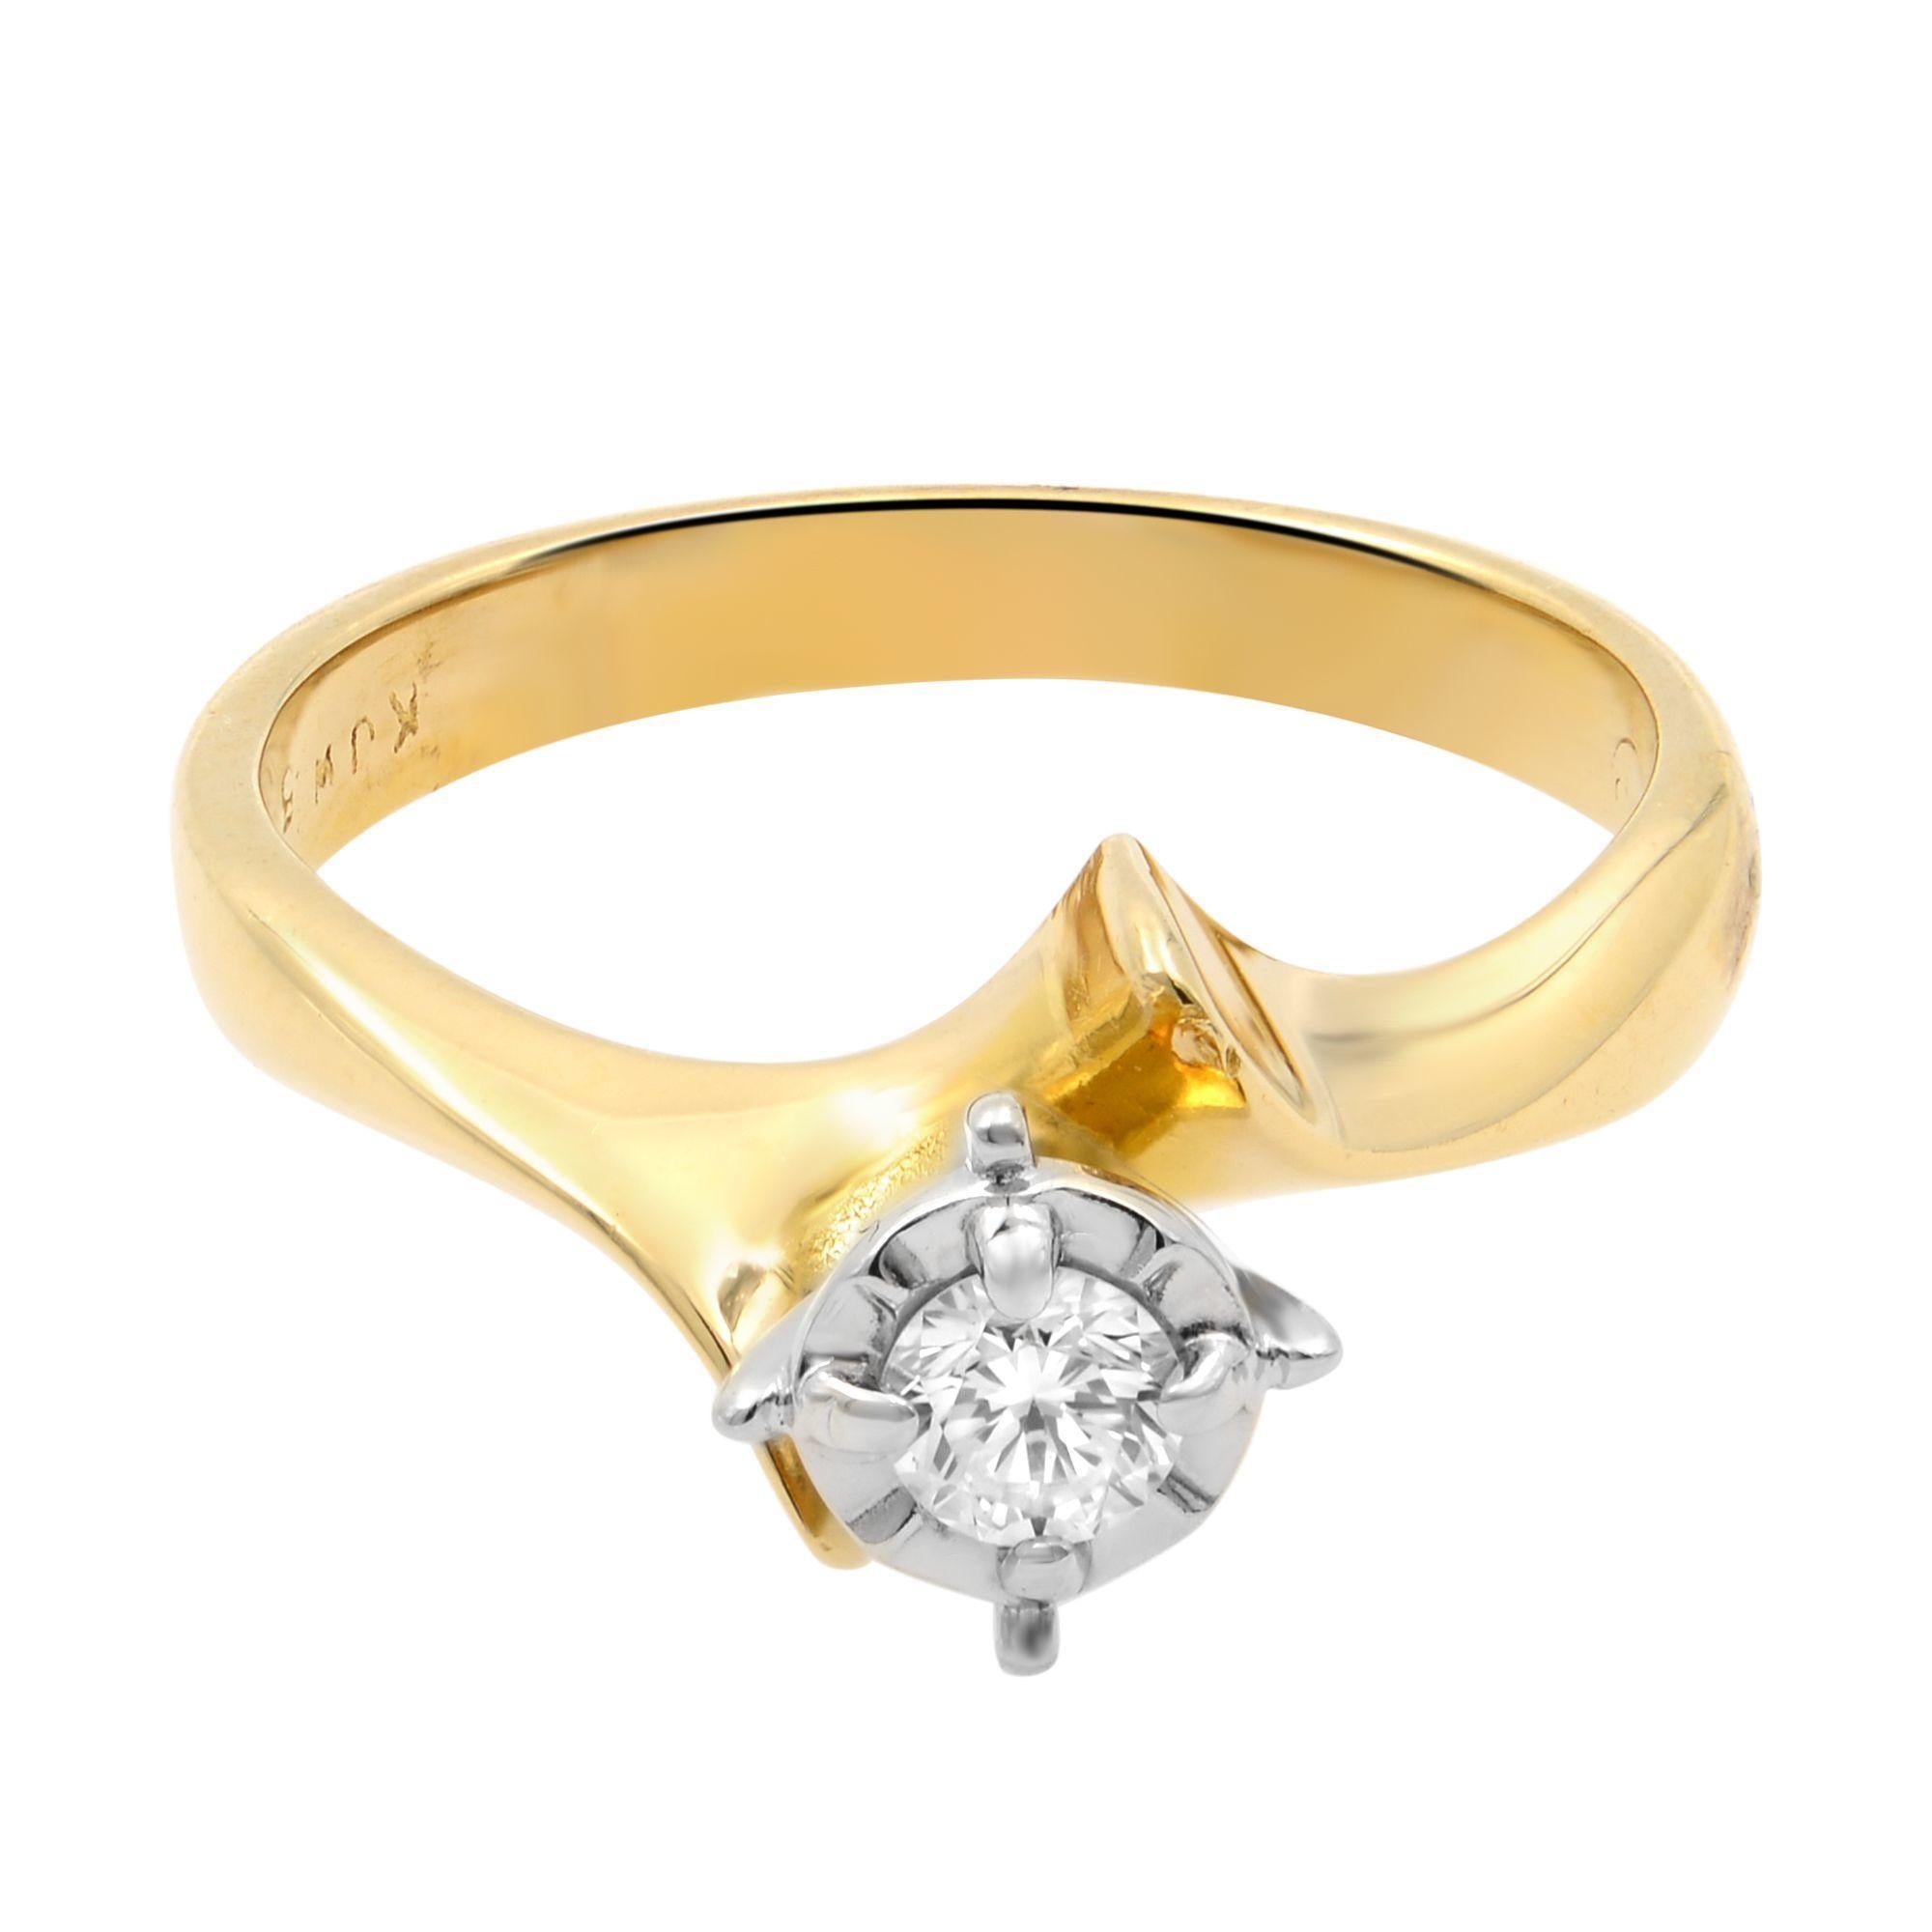 Simple yet alluring, minimalist diamond solitaire engagement ring crafted in 14k yellow gold. Dainty and beautiful, prong set diamond engagement or promise ring. Set with 0.15ct tiny diamond, this ring gives an illusion of a bigger stone ring. Ring